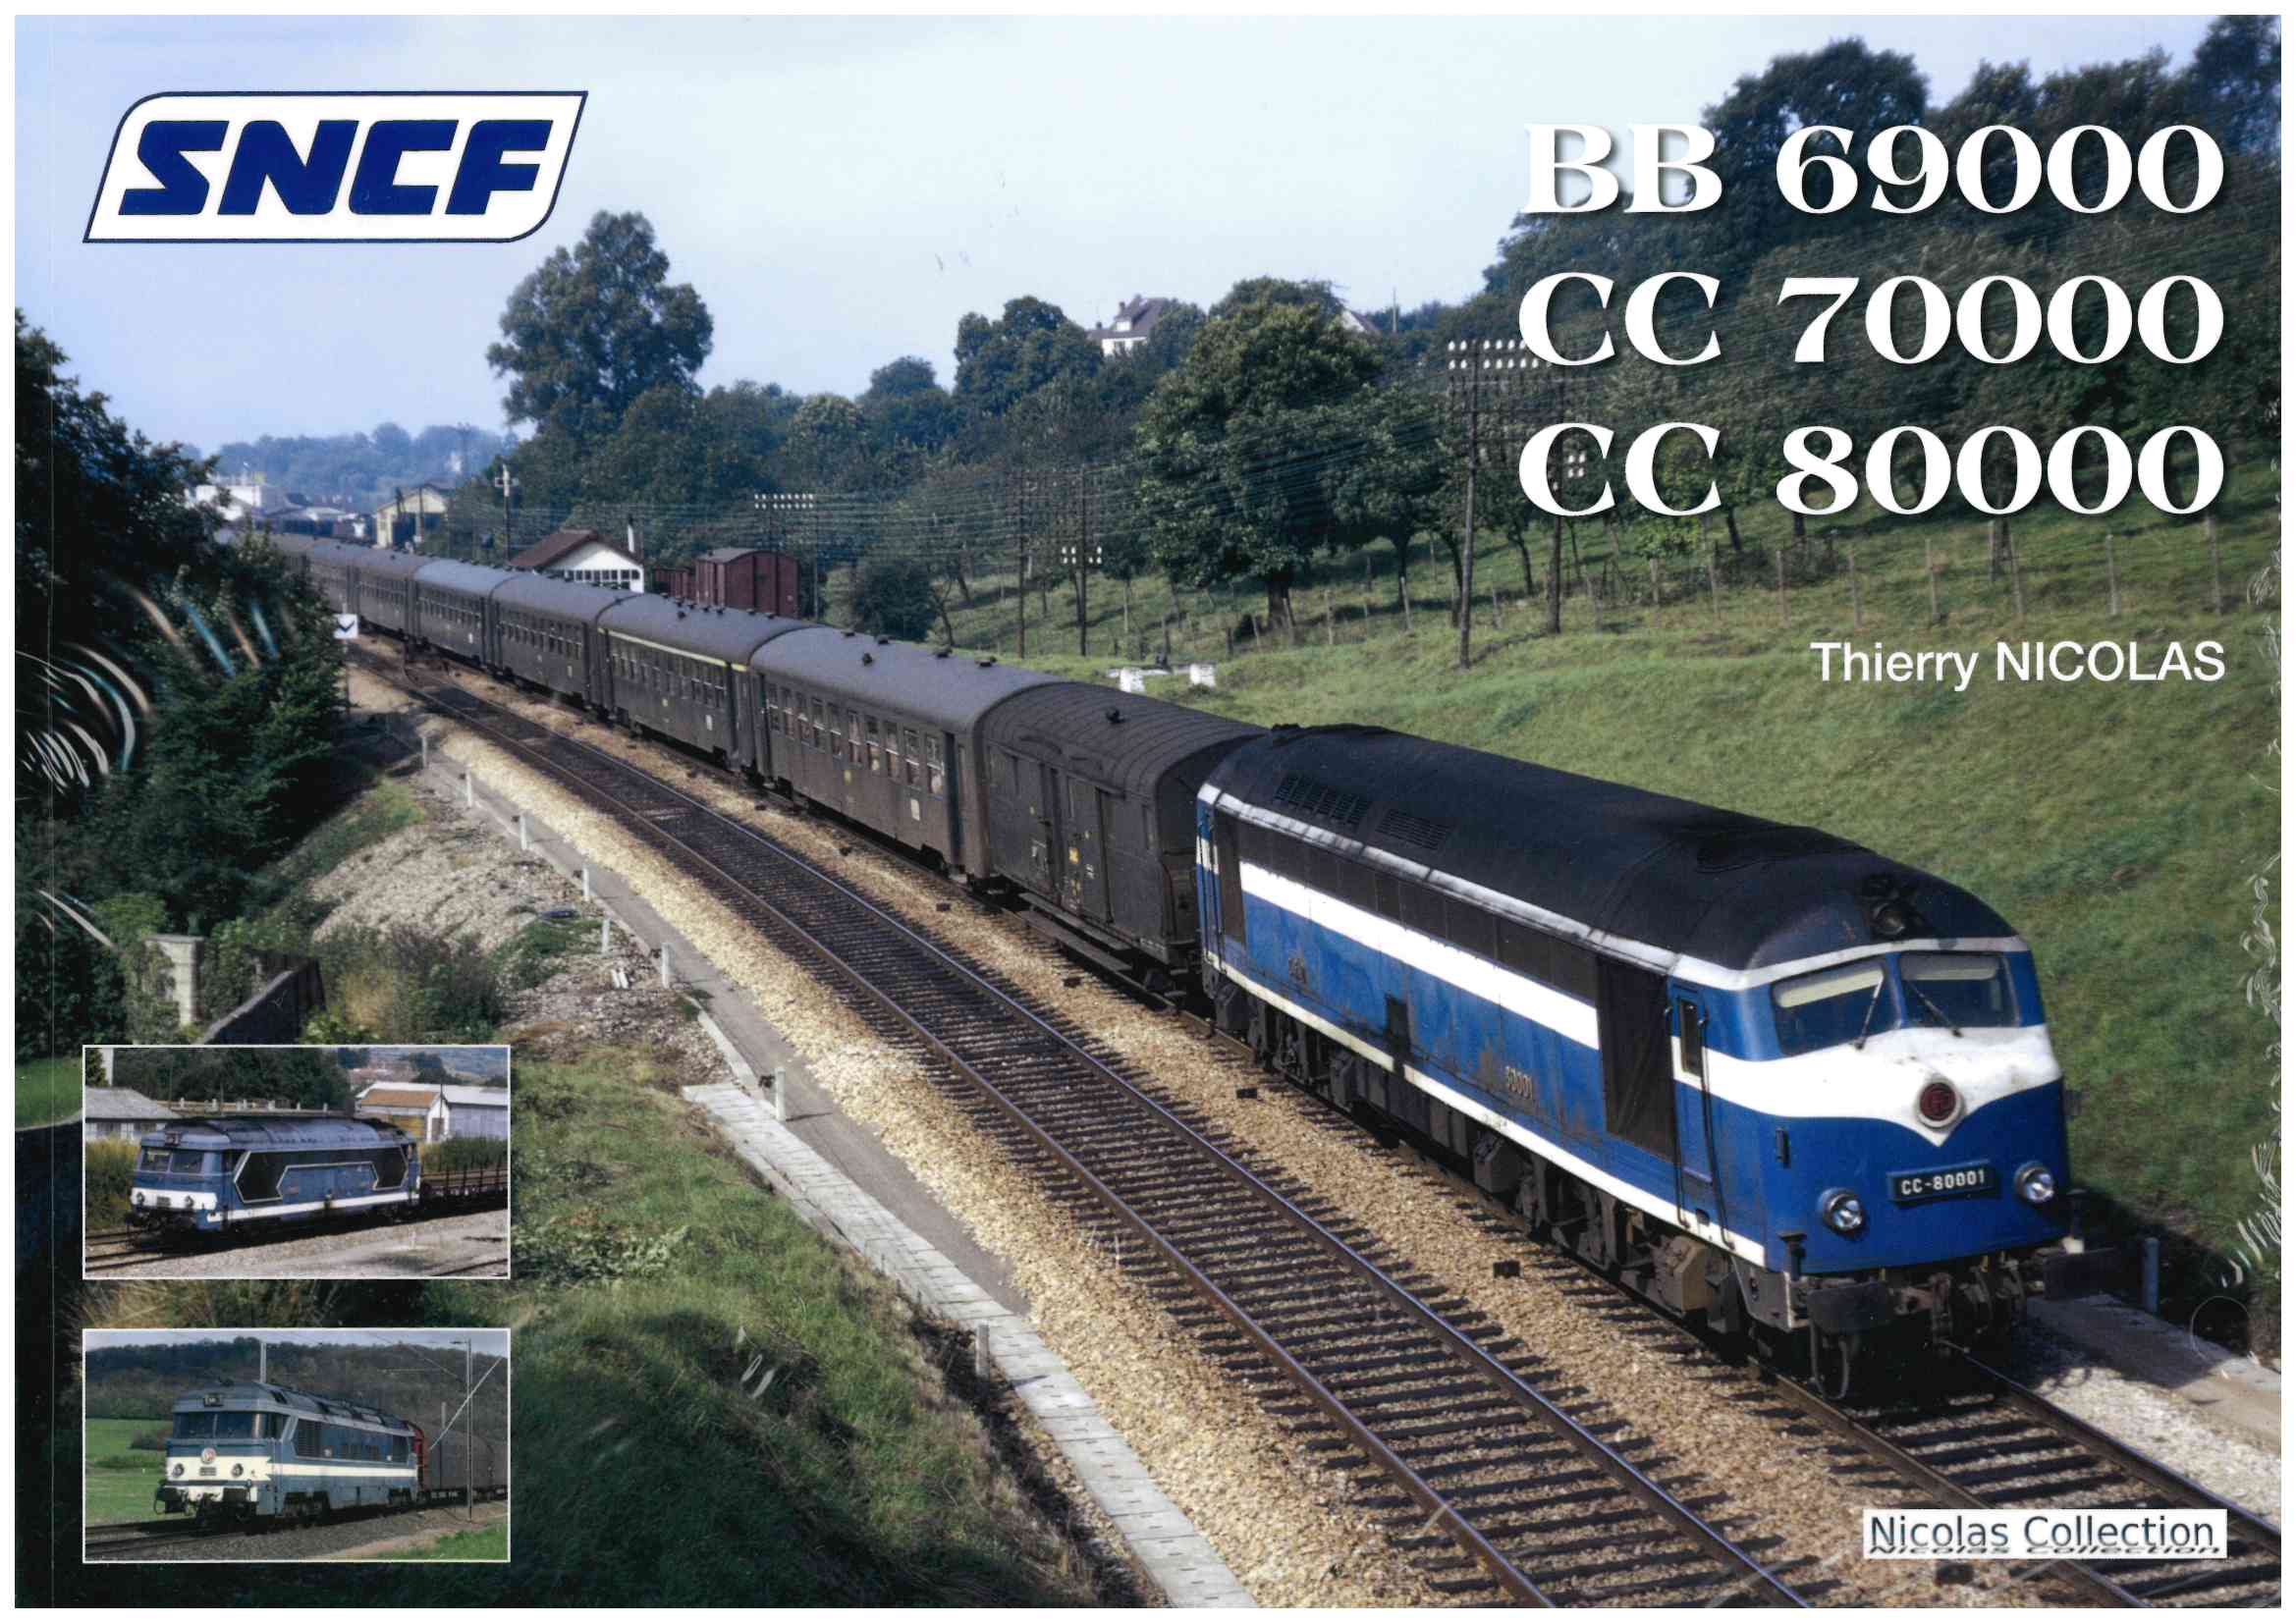 Buch SNCF BB 69000, CC70000 CC 80000 - Thierry Nicolas Collection